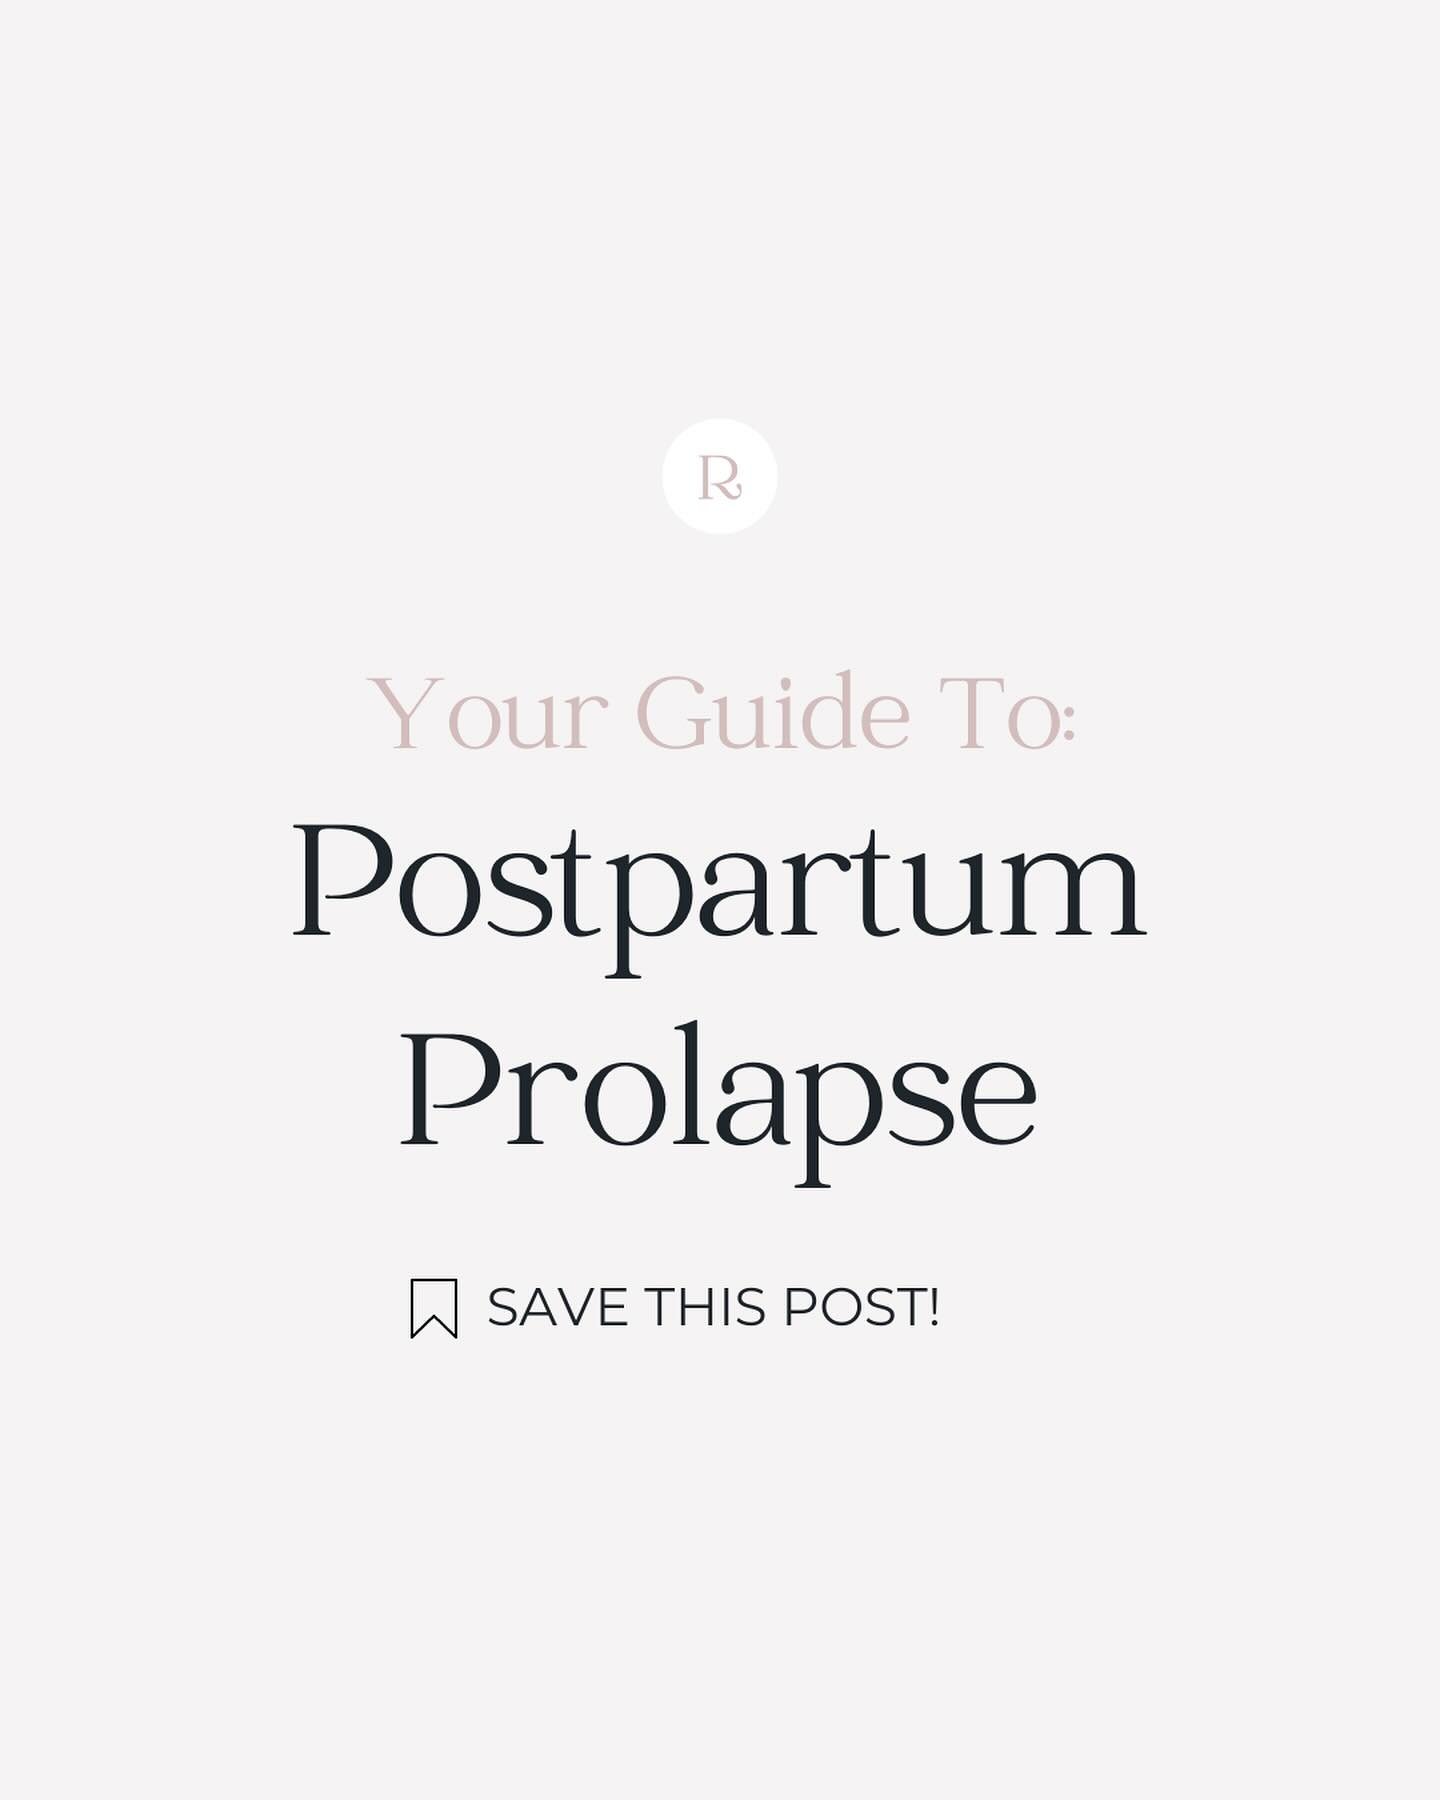 Let&rsquo;s chat about postpartum prolapse 👇🏼

Prolapse happens when pelvic organs drop due to weakened pelvic floor muscles post-birth.

It can be both physically and emotionally challenging, affecting not just your body but how you feel in it dur